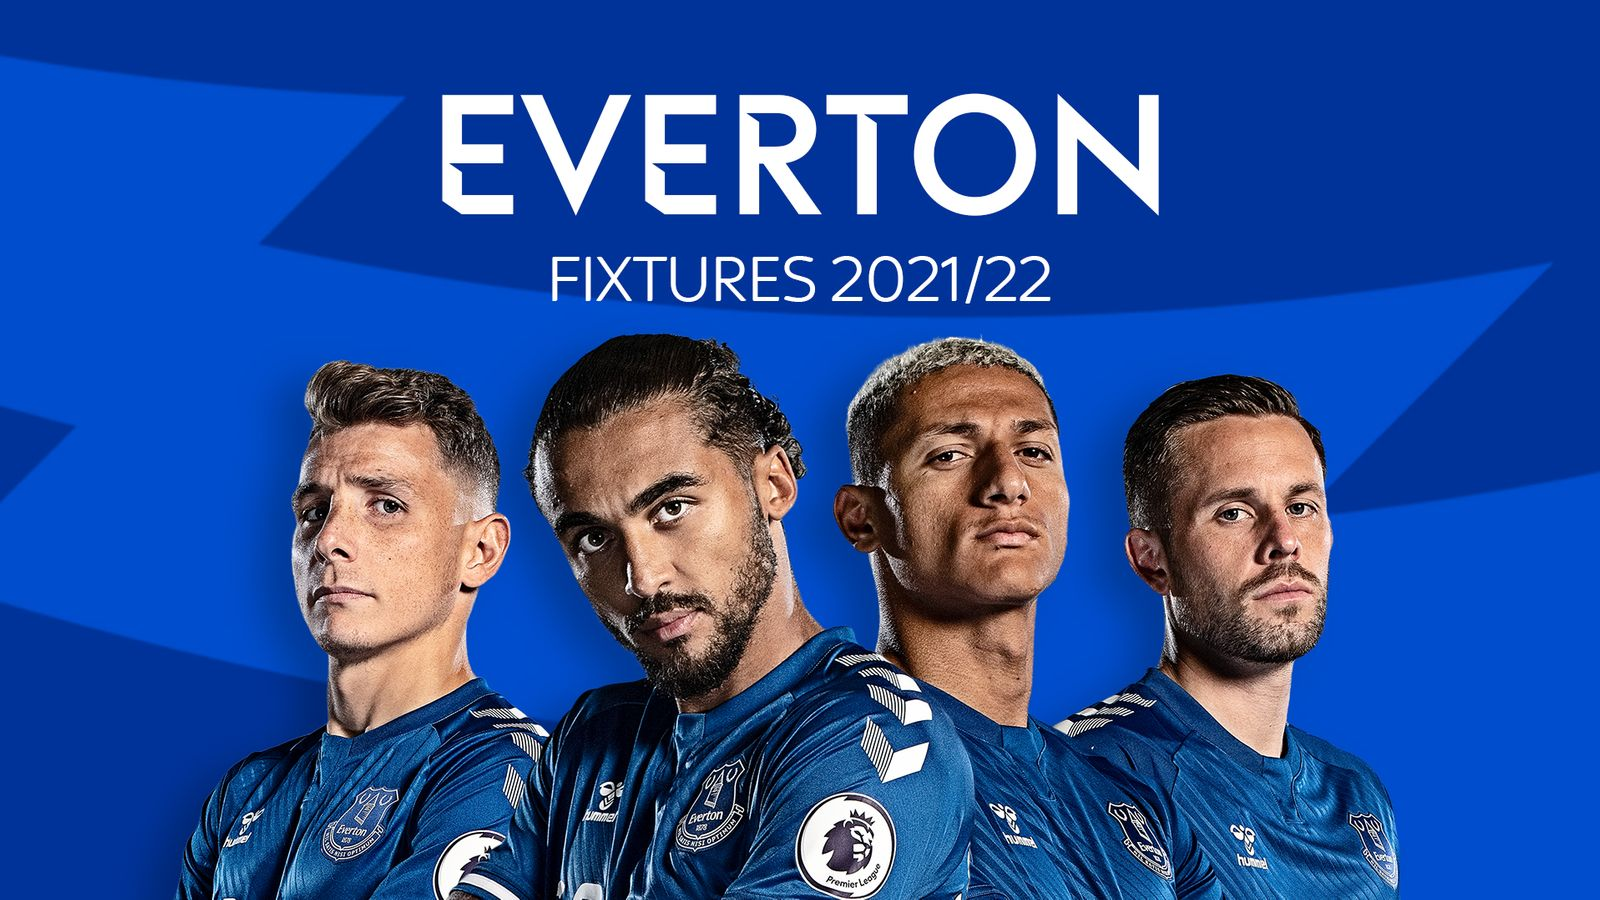 Everton Premier League 2021-22: Fixtures and Match Schedules in Full